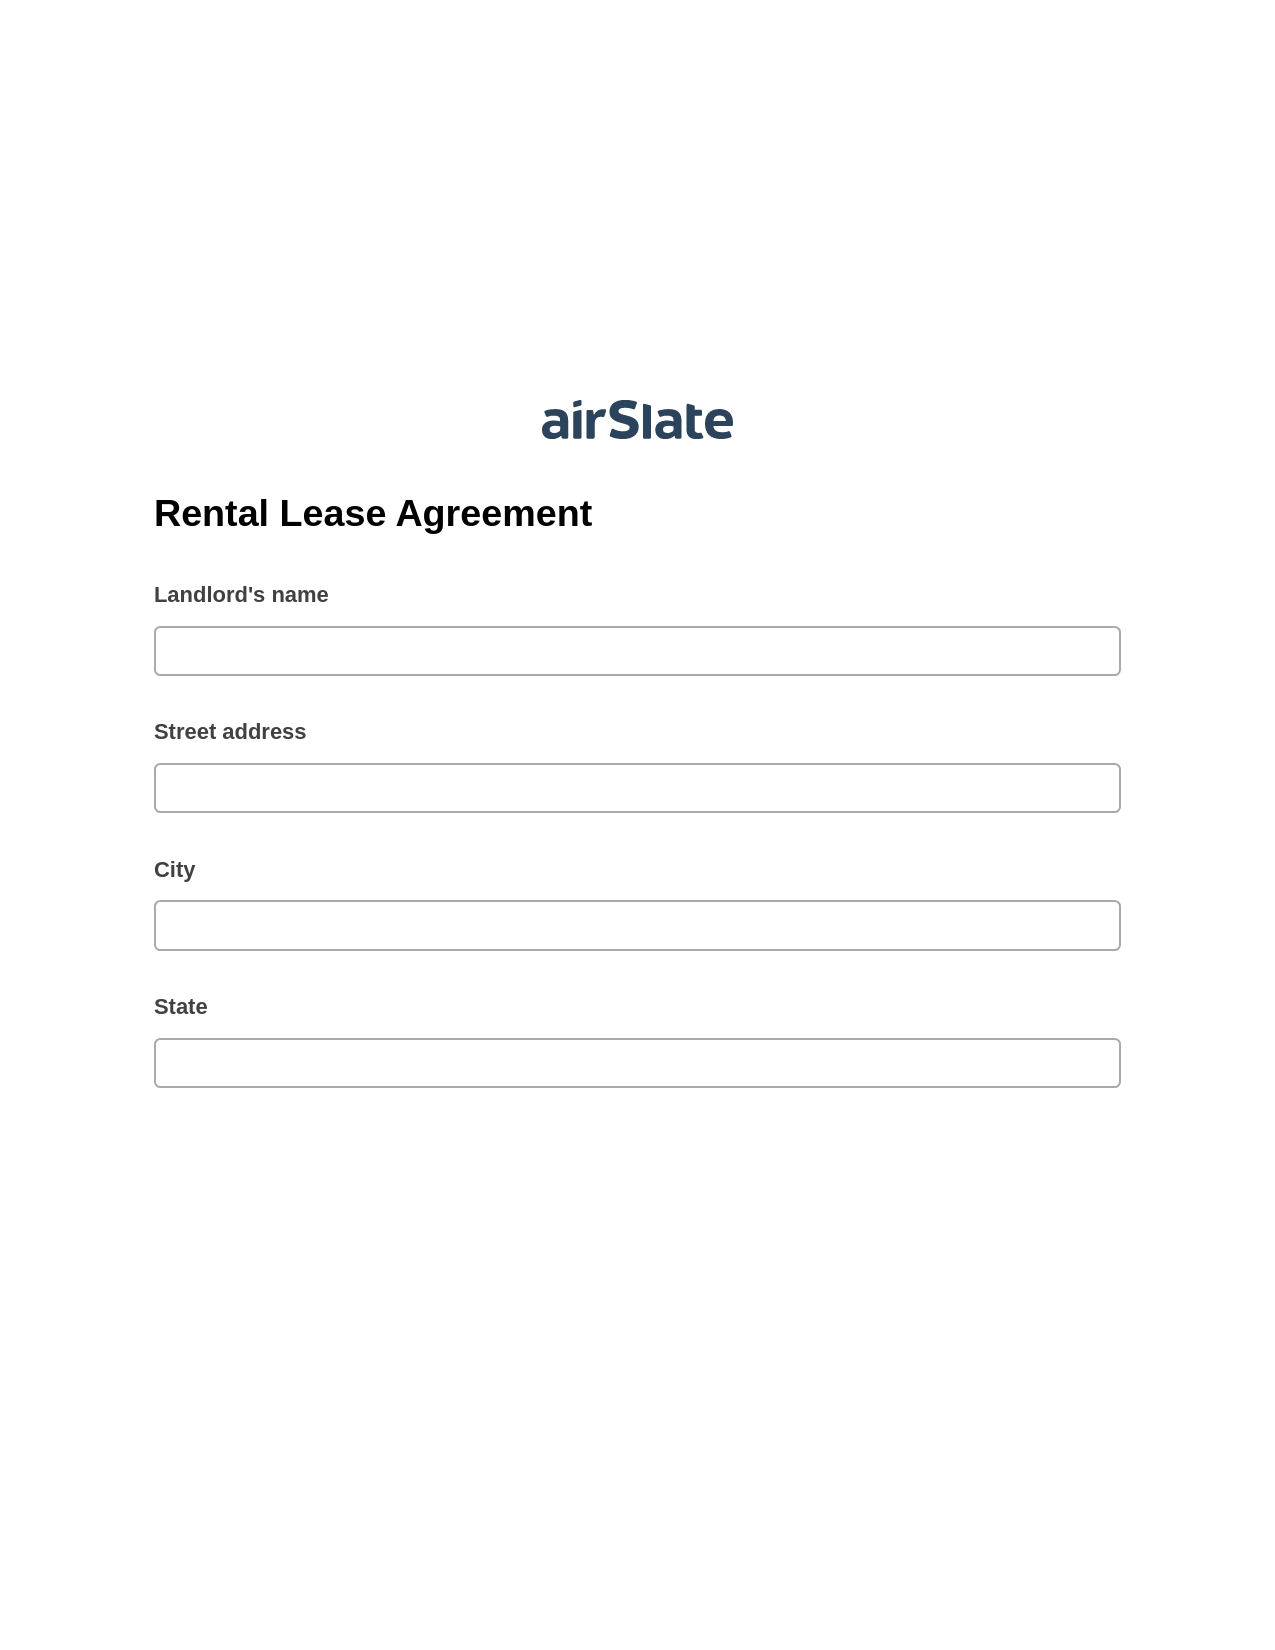 Rental Lease Agreement Pre-fill from Office 365 Excel Bot, Update NetSuite Records Bot, Export to Salesforce Bot